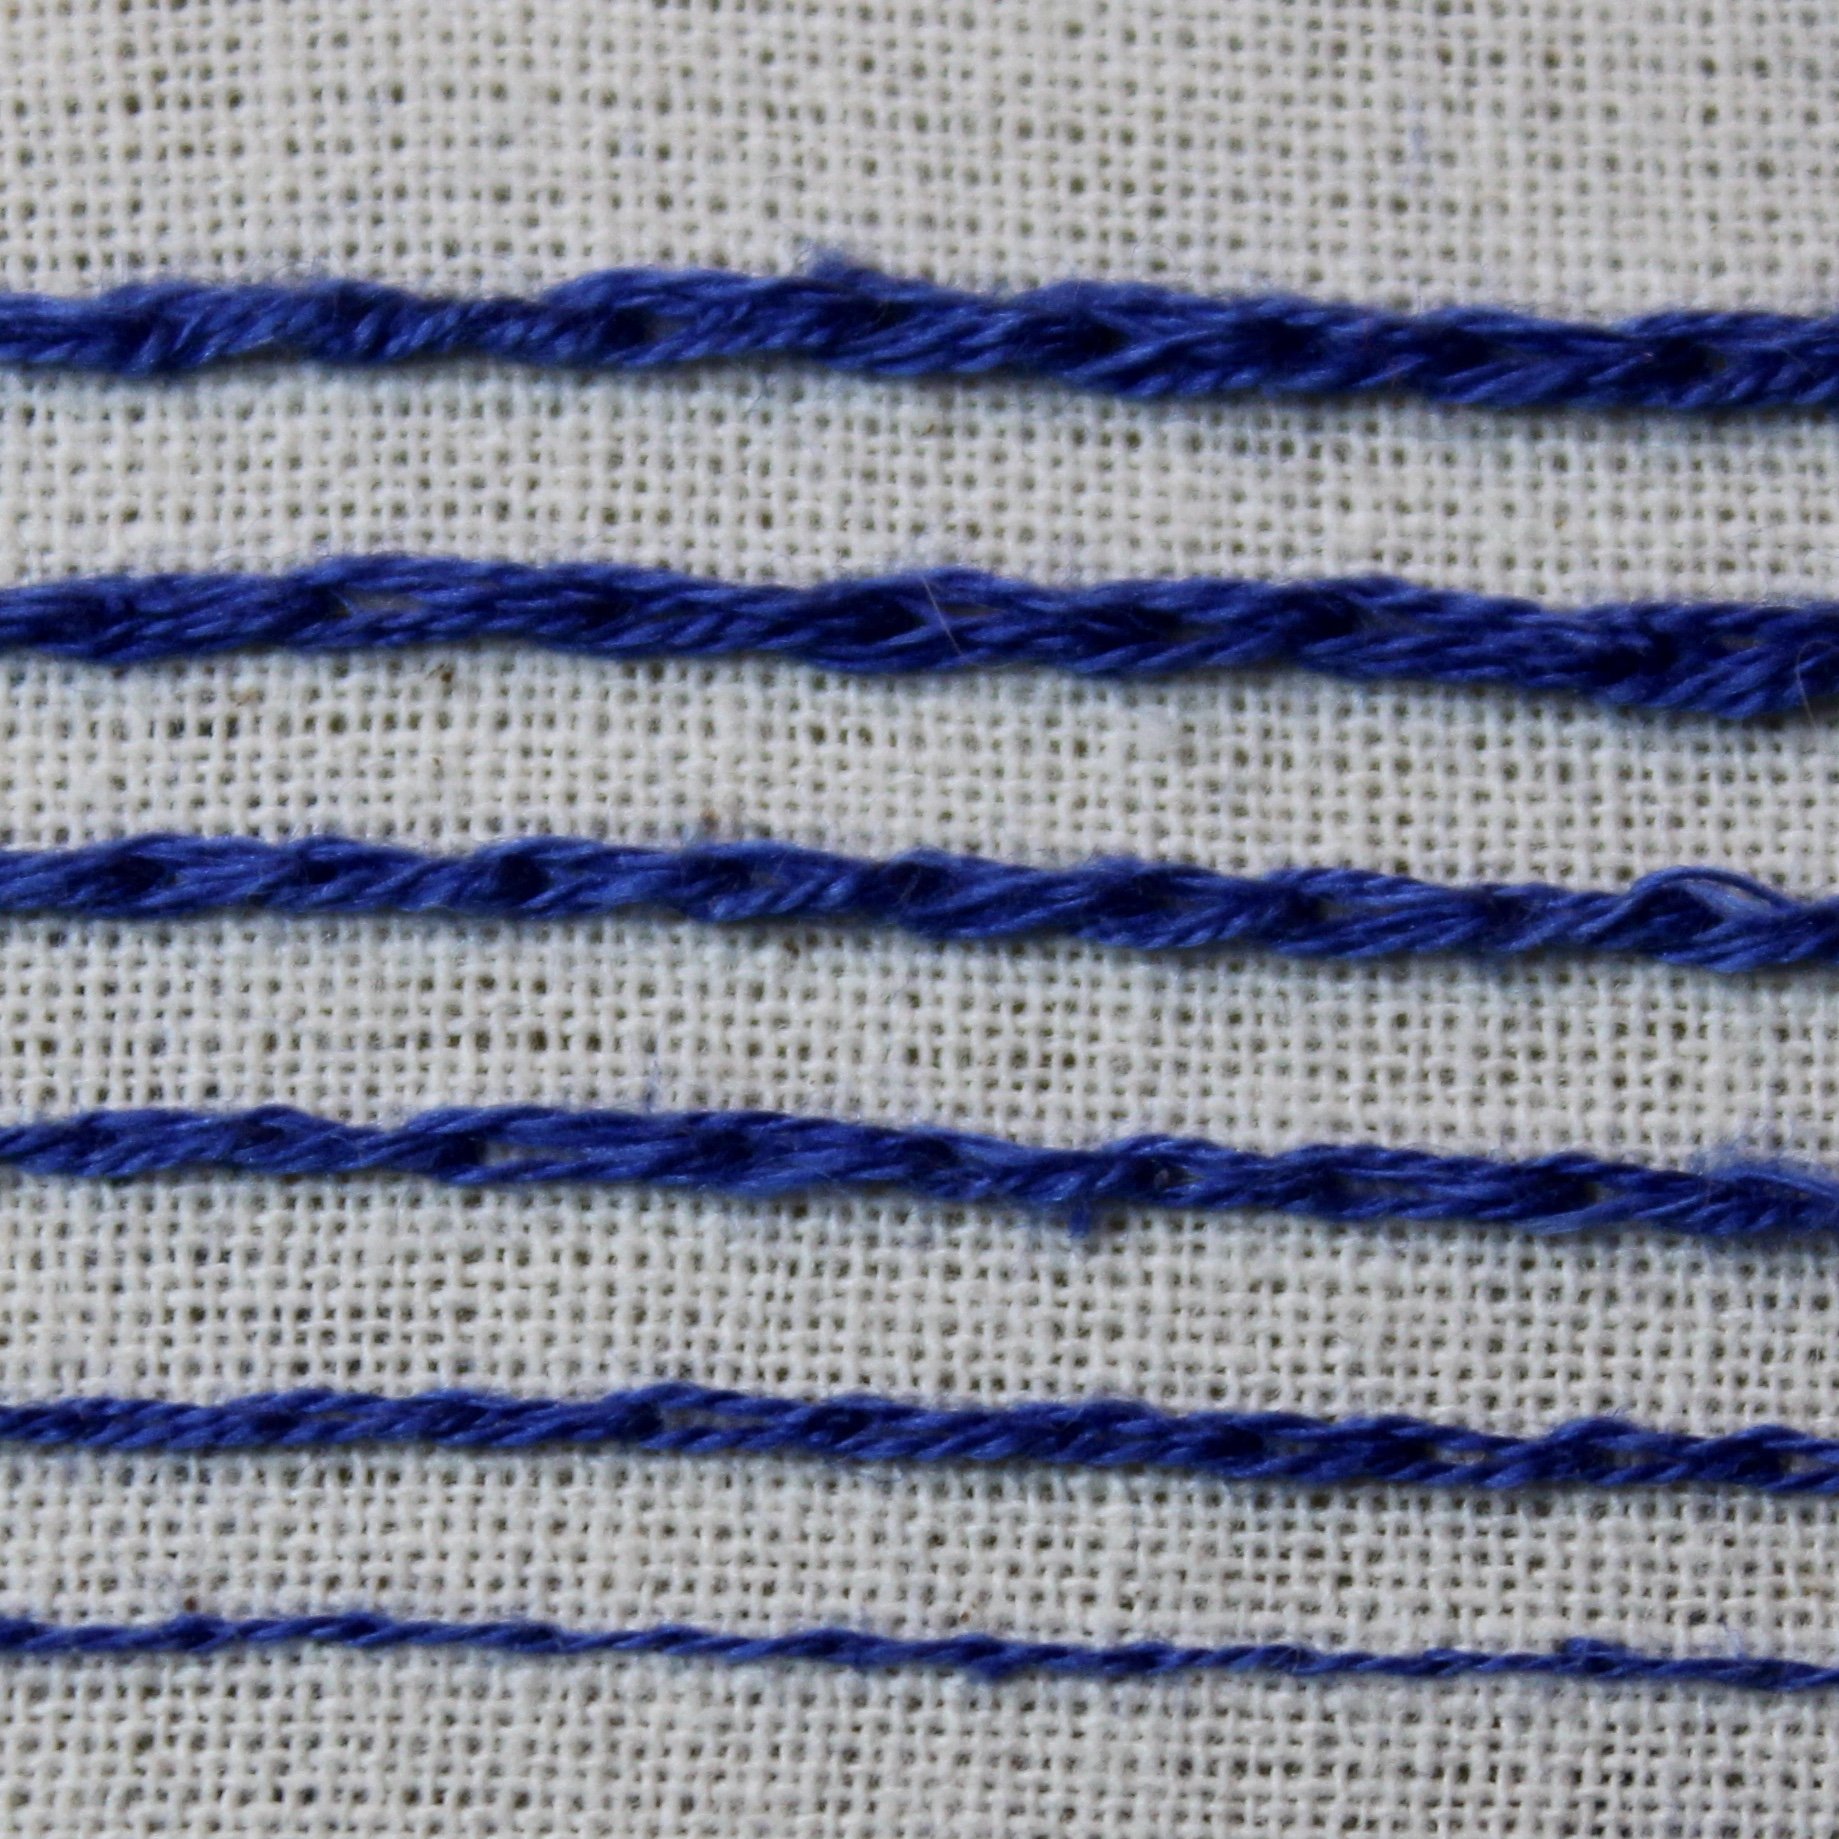 How many strands of thread should you use?